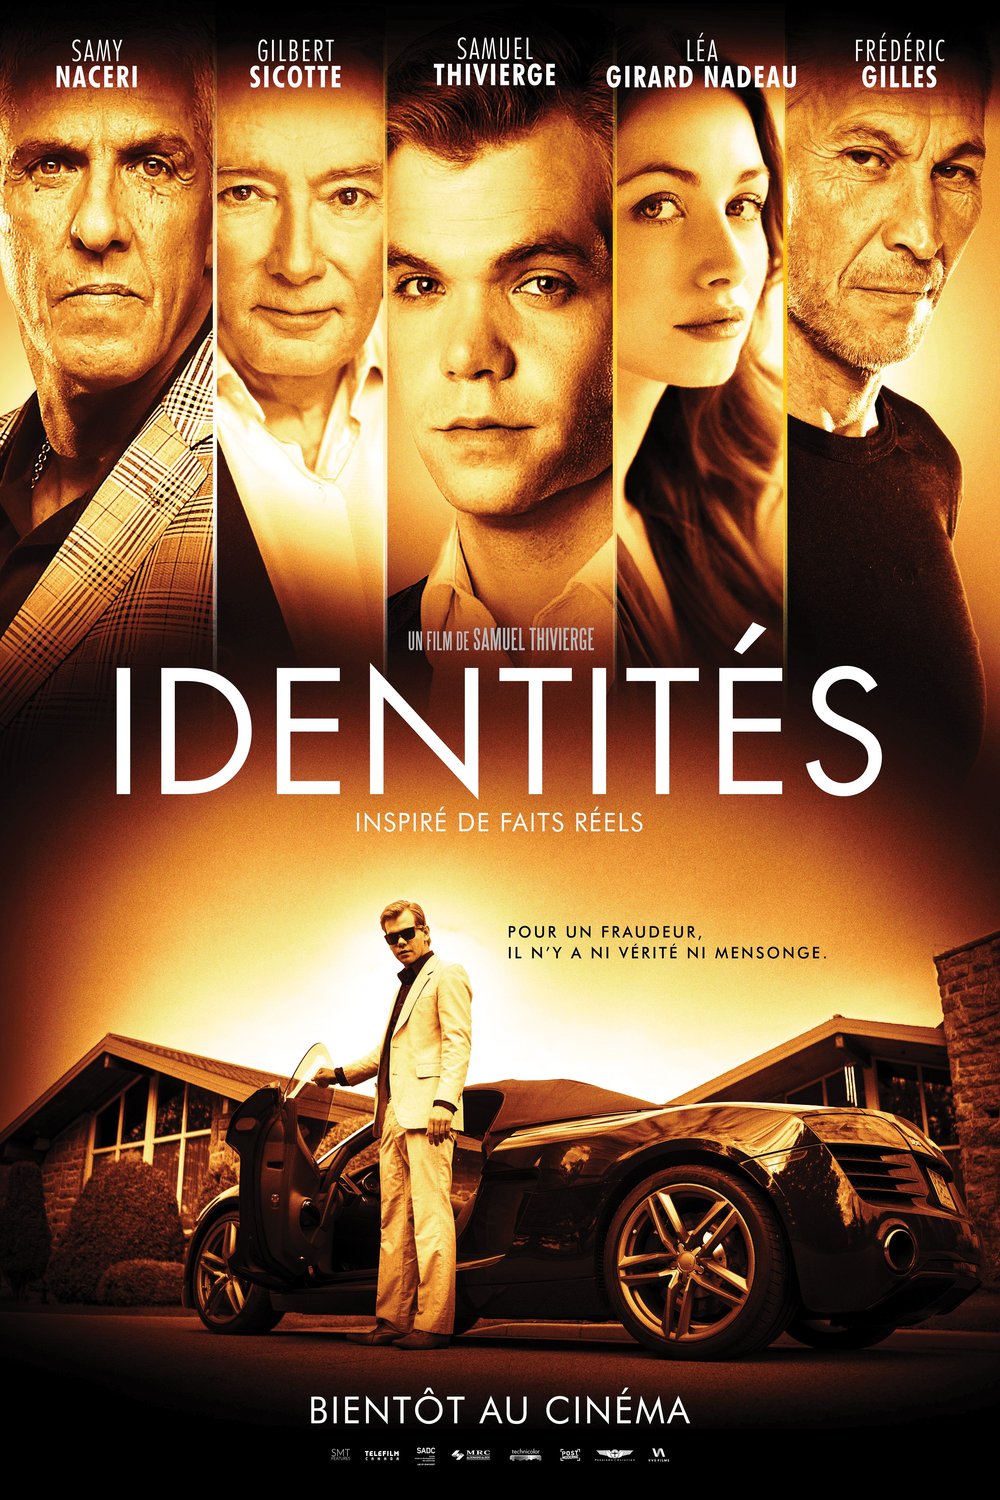 Poster of the movie Identités